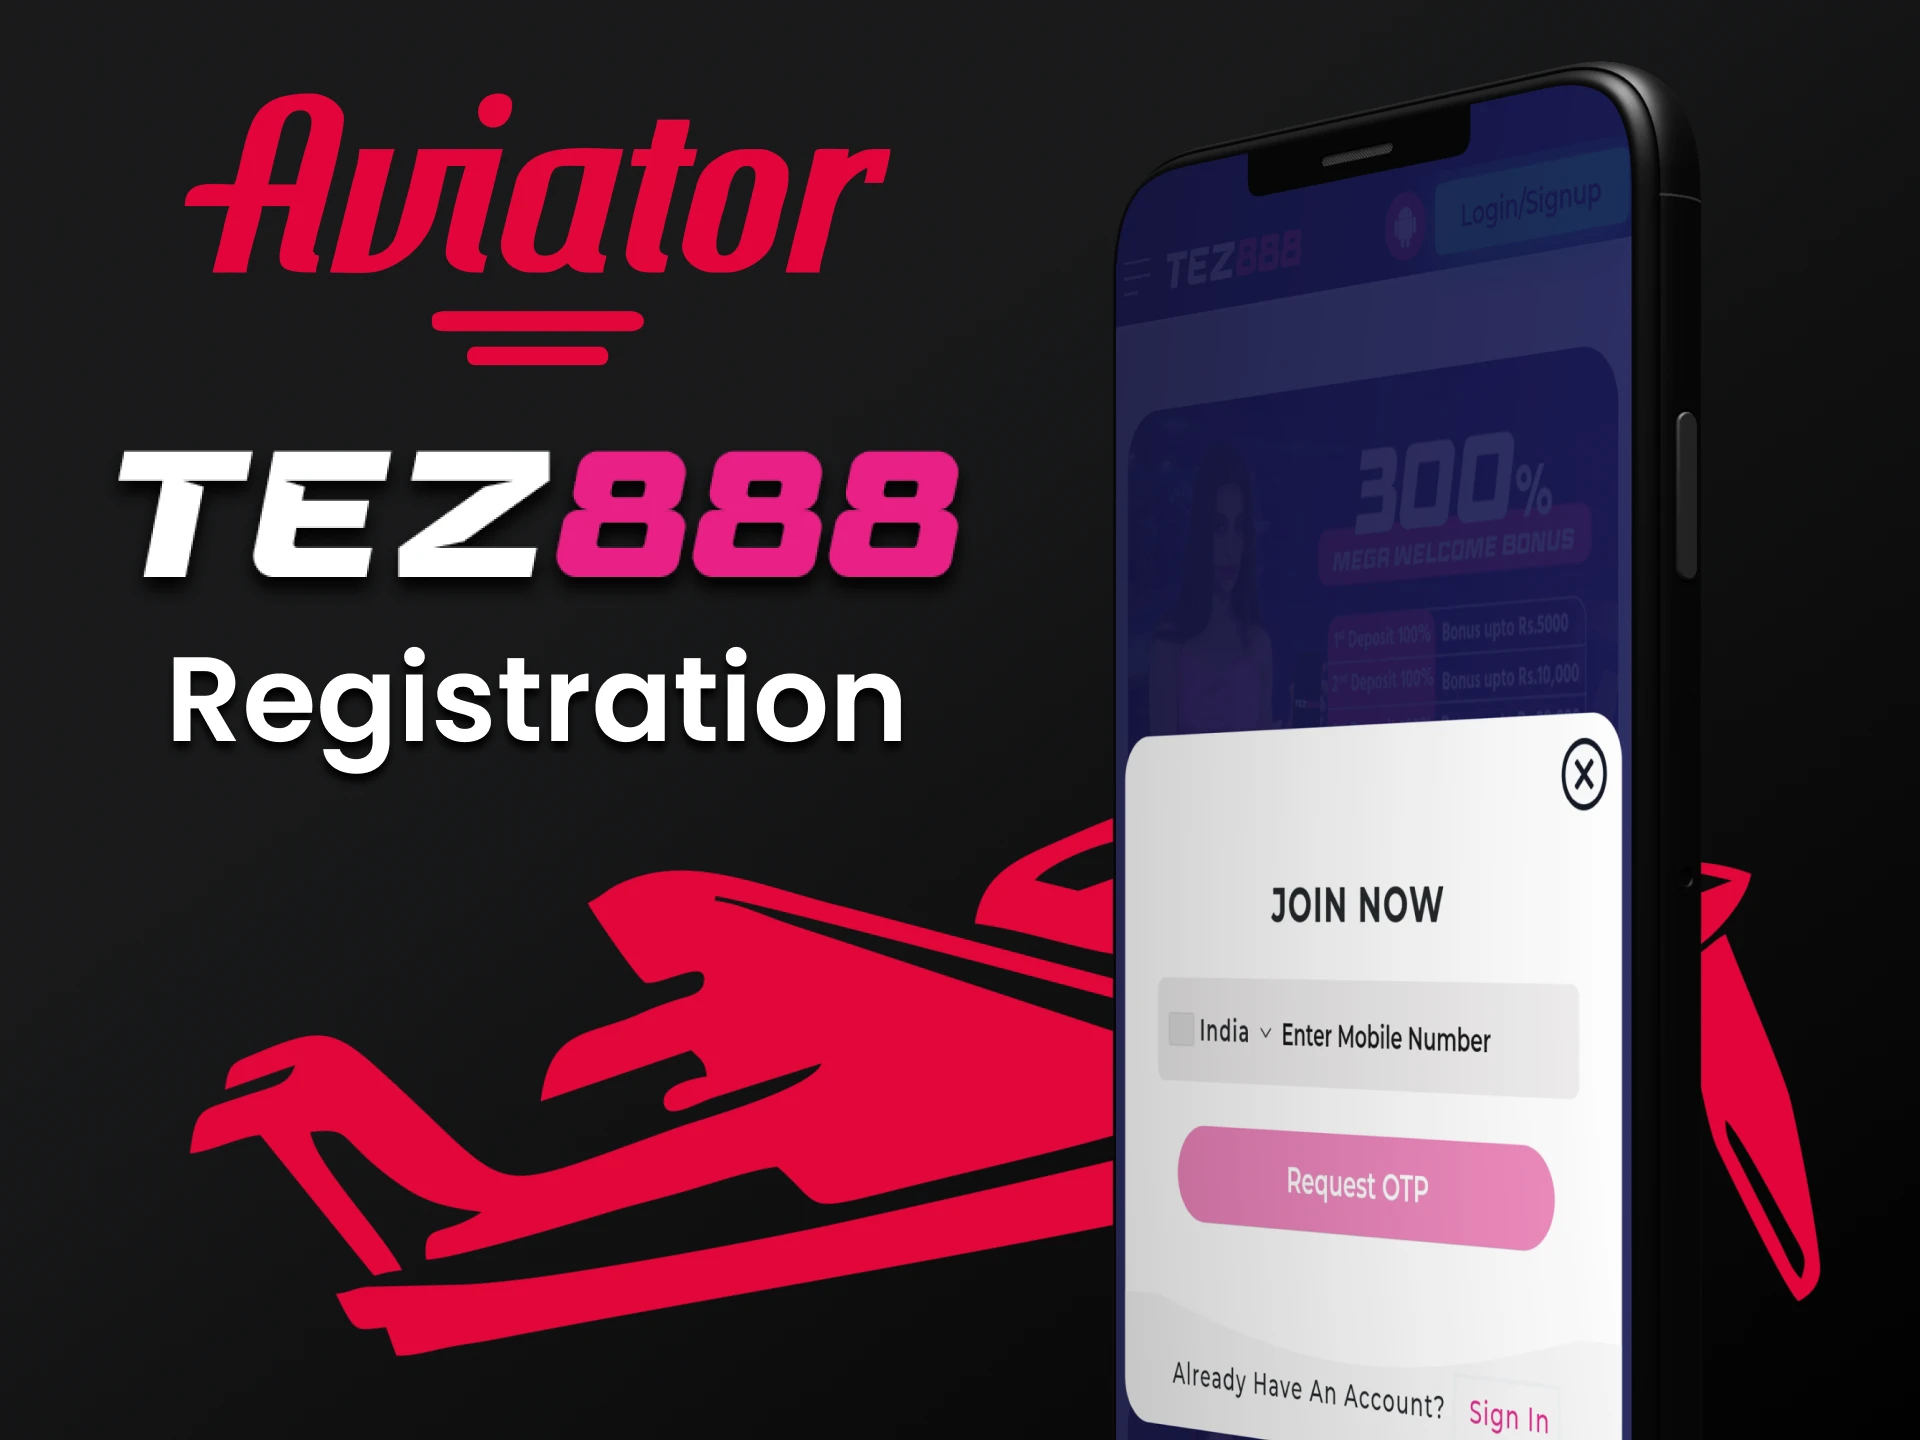 You can create an account to play Aviator in the Tez888 application.